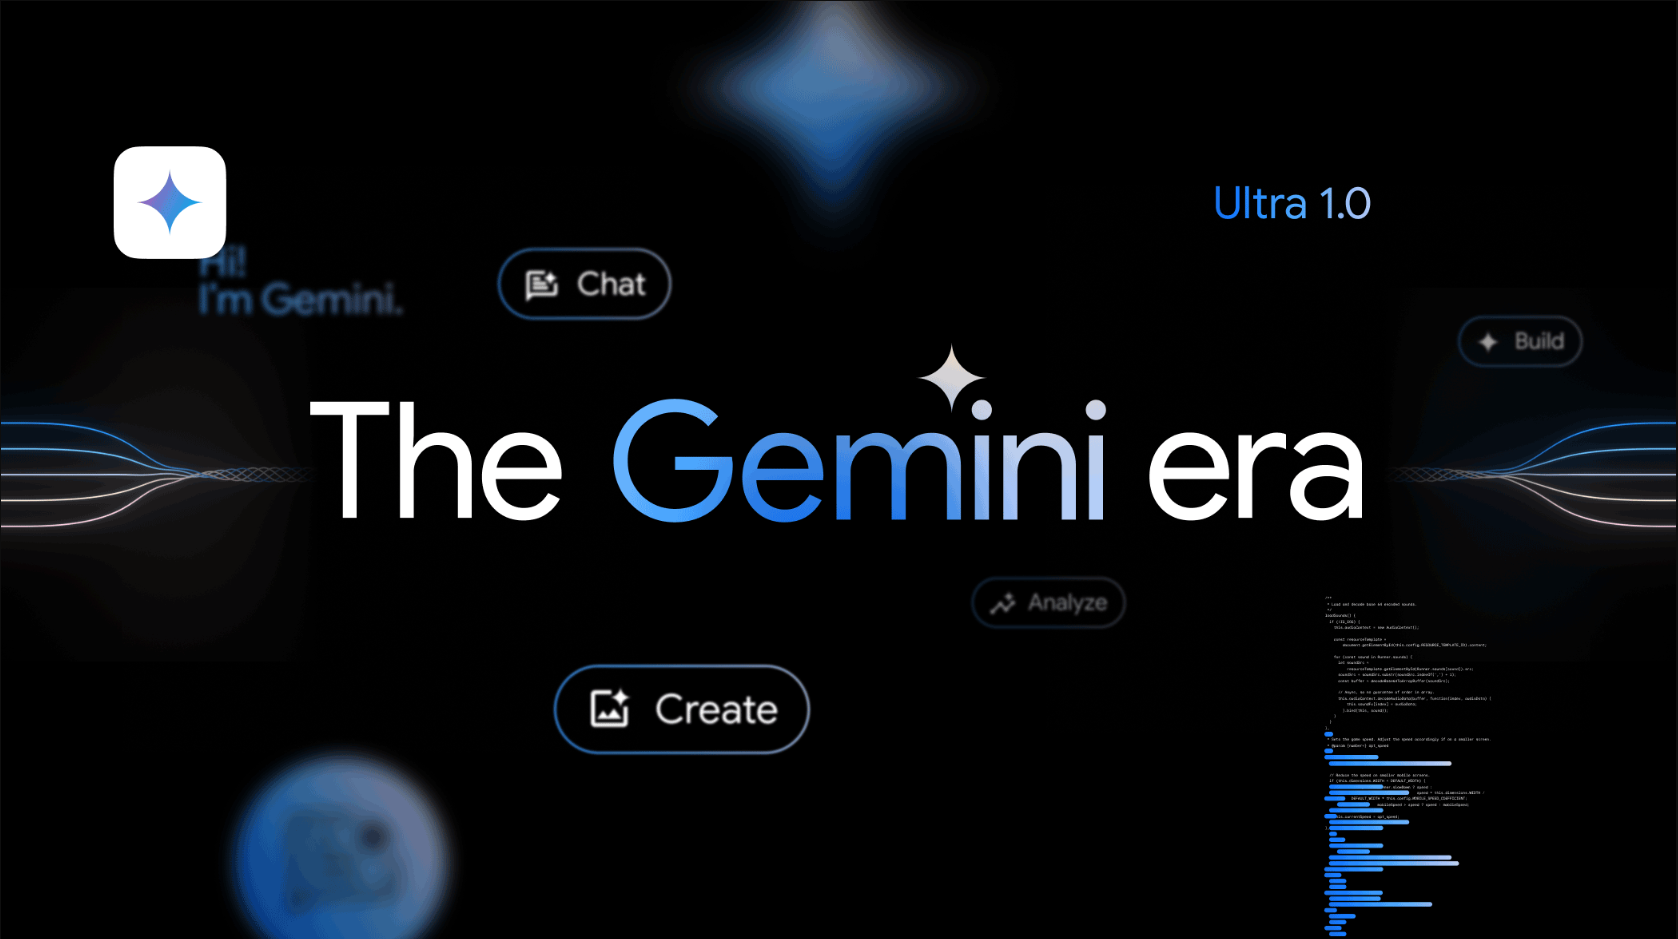 Google official poster during rebranding of Bard to Gemini